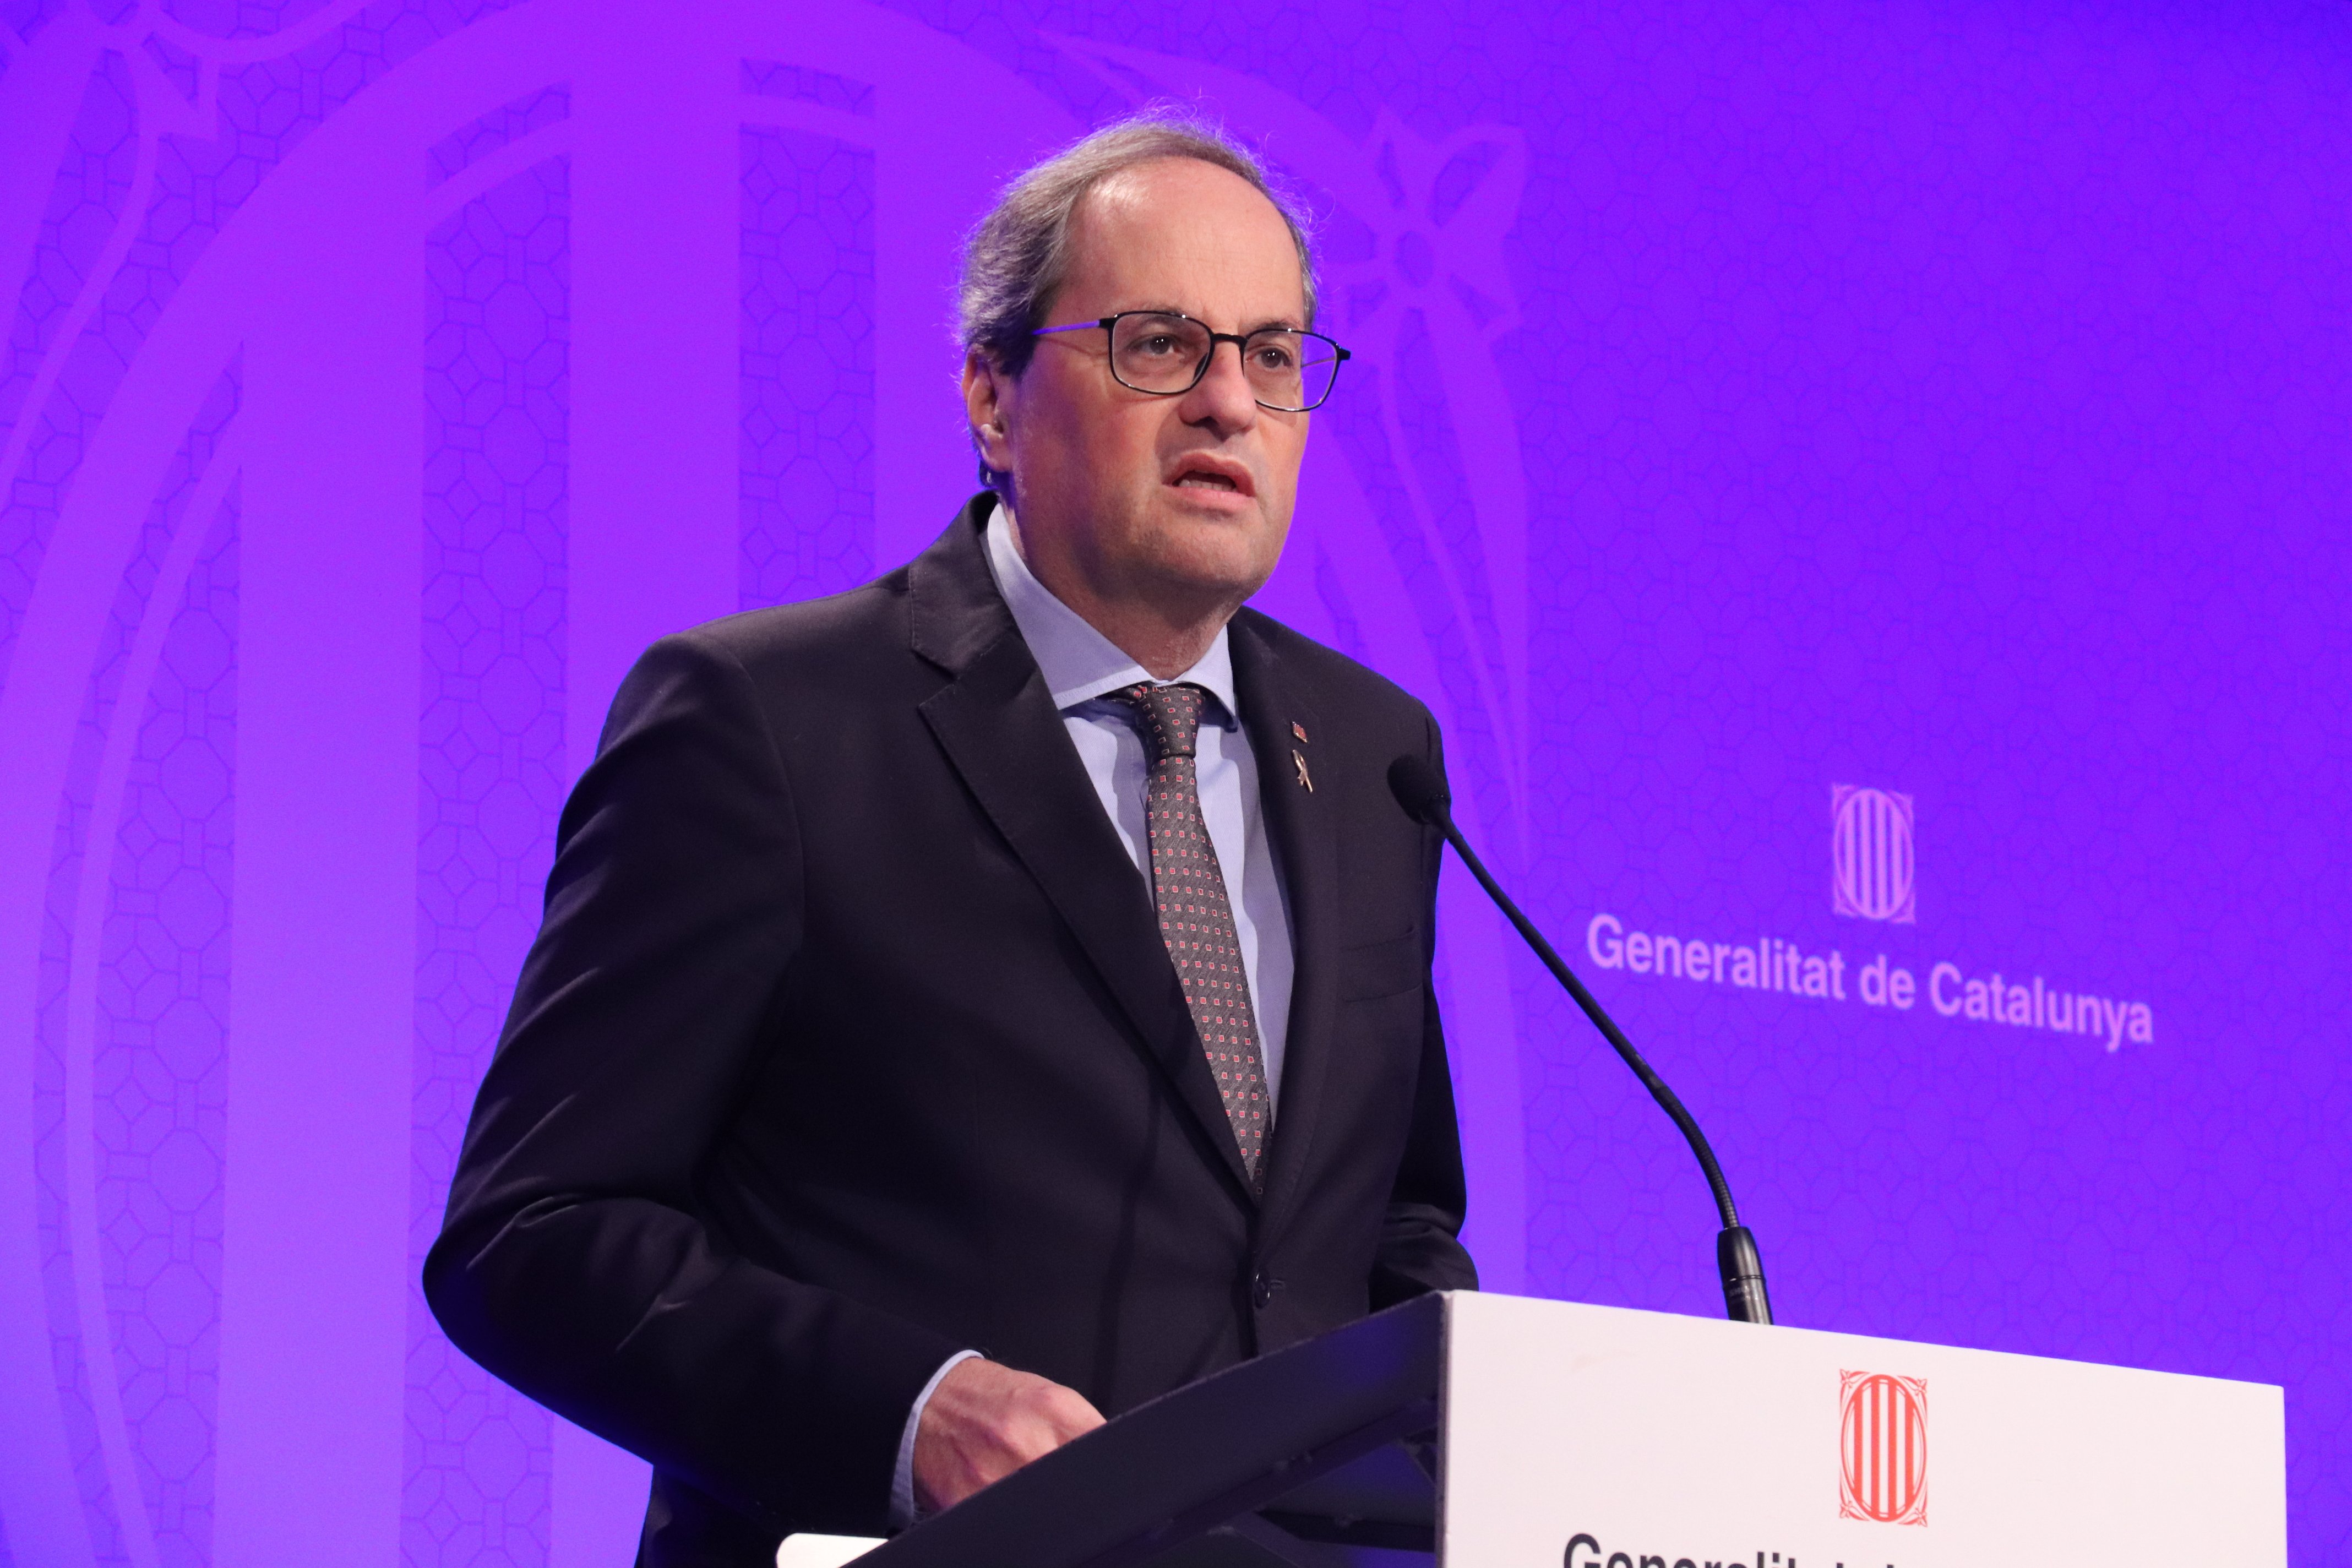 President Torra decides to place Catalonia in lockdown due to coronavirus